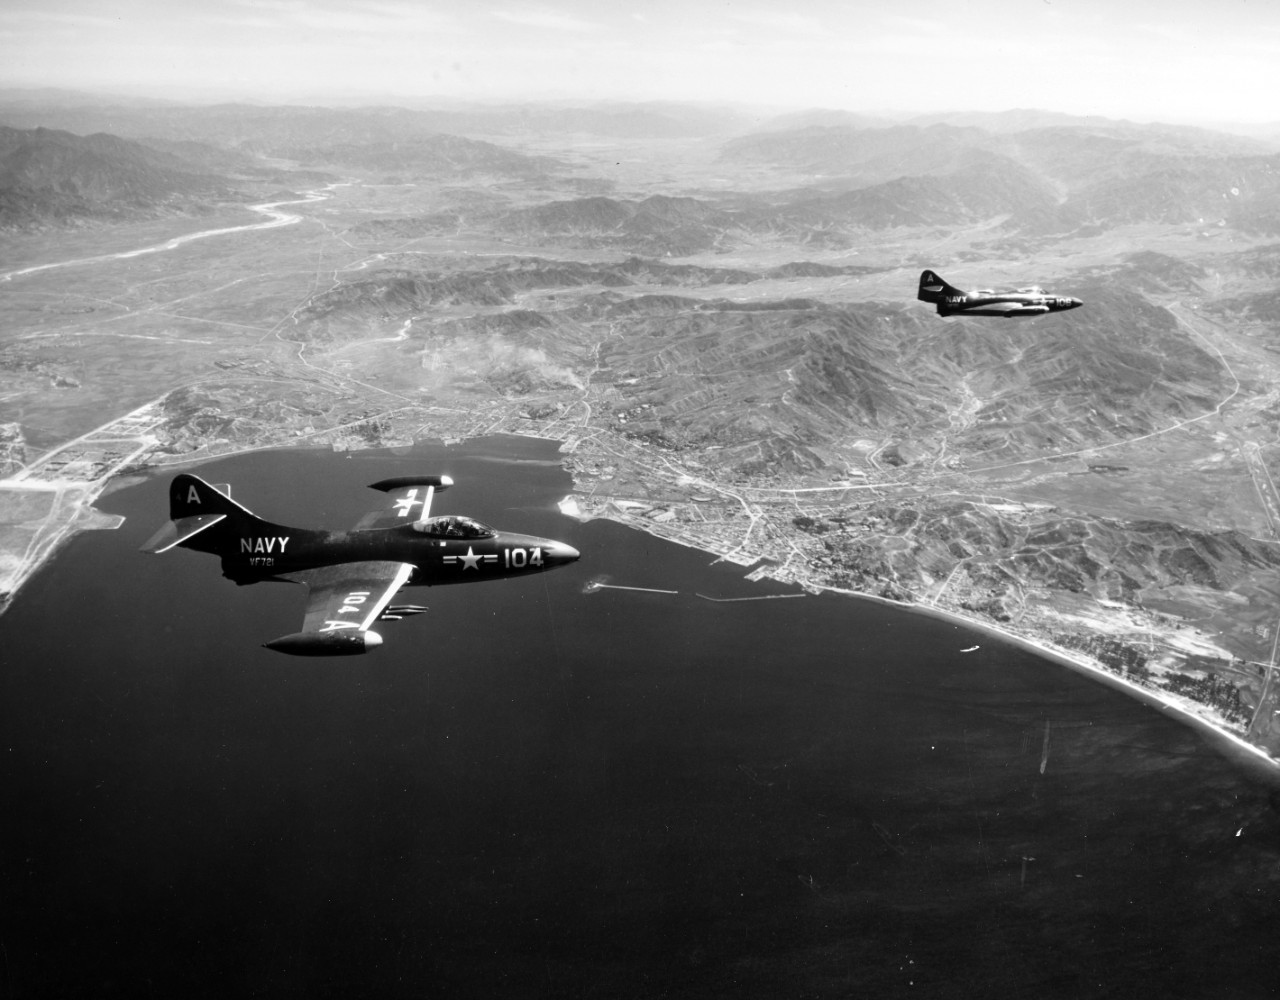 Photo #: 80-G-431907  Grumman F9F-2 &quot;Panther&quot; fighters